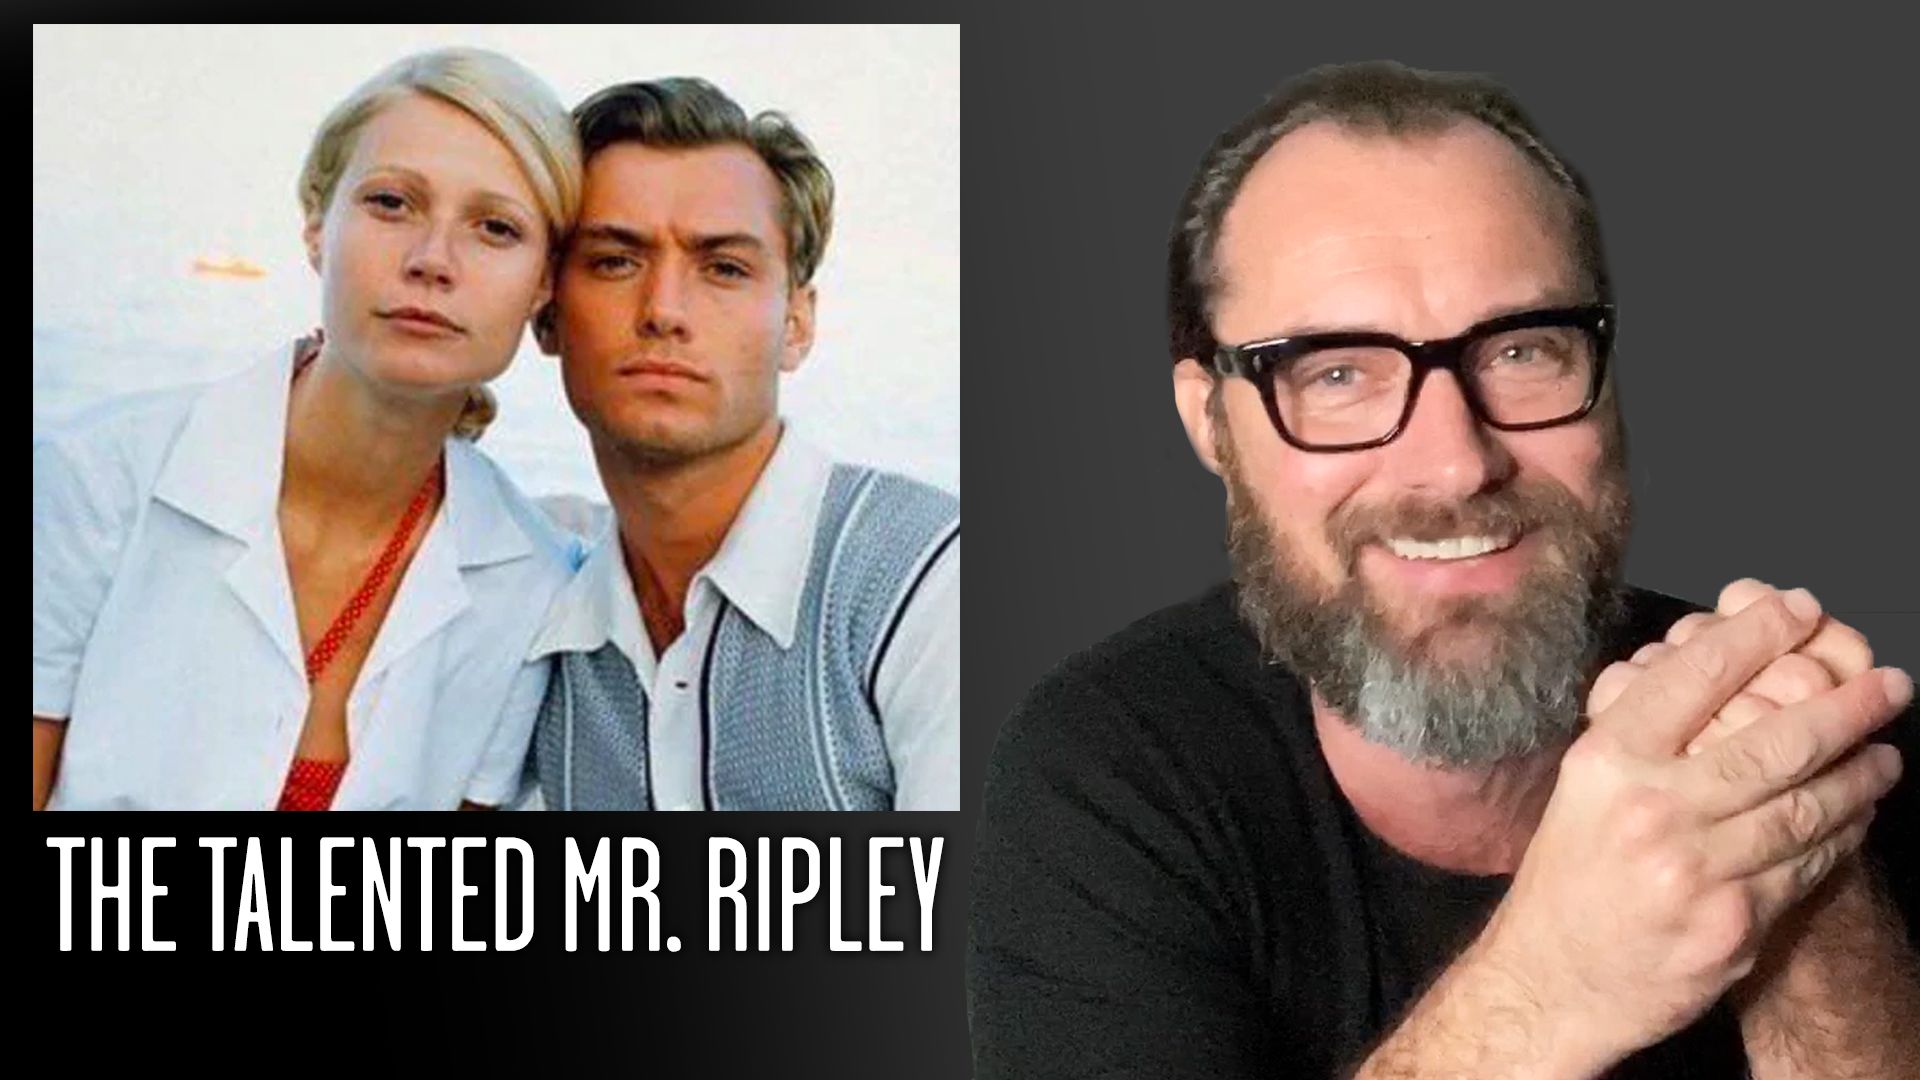 The End Of The Talented Mr. Ripley Explained